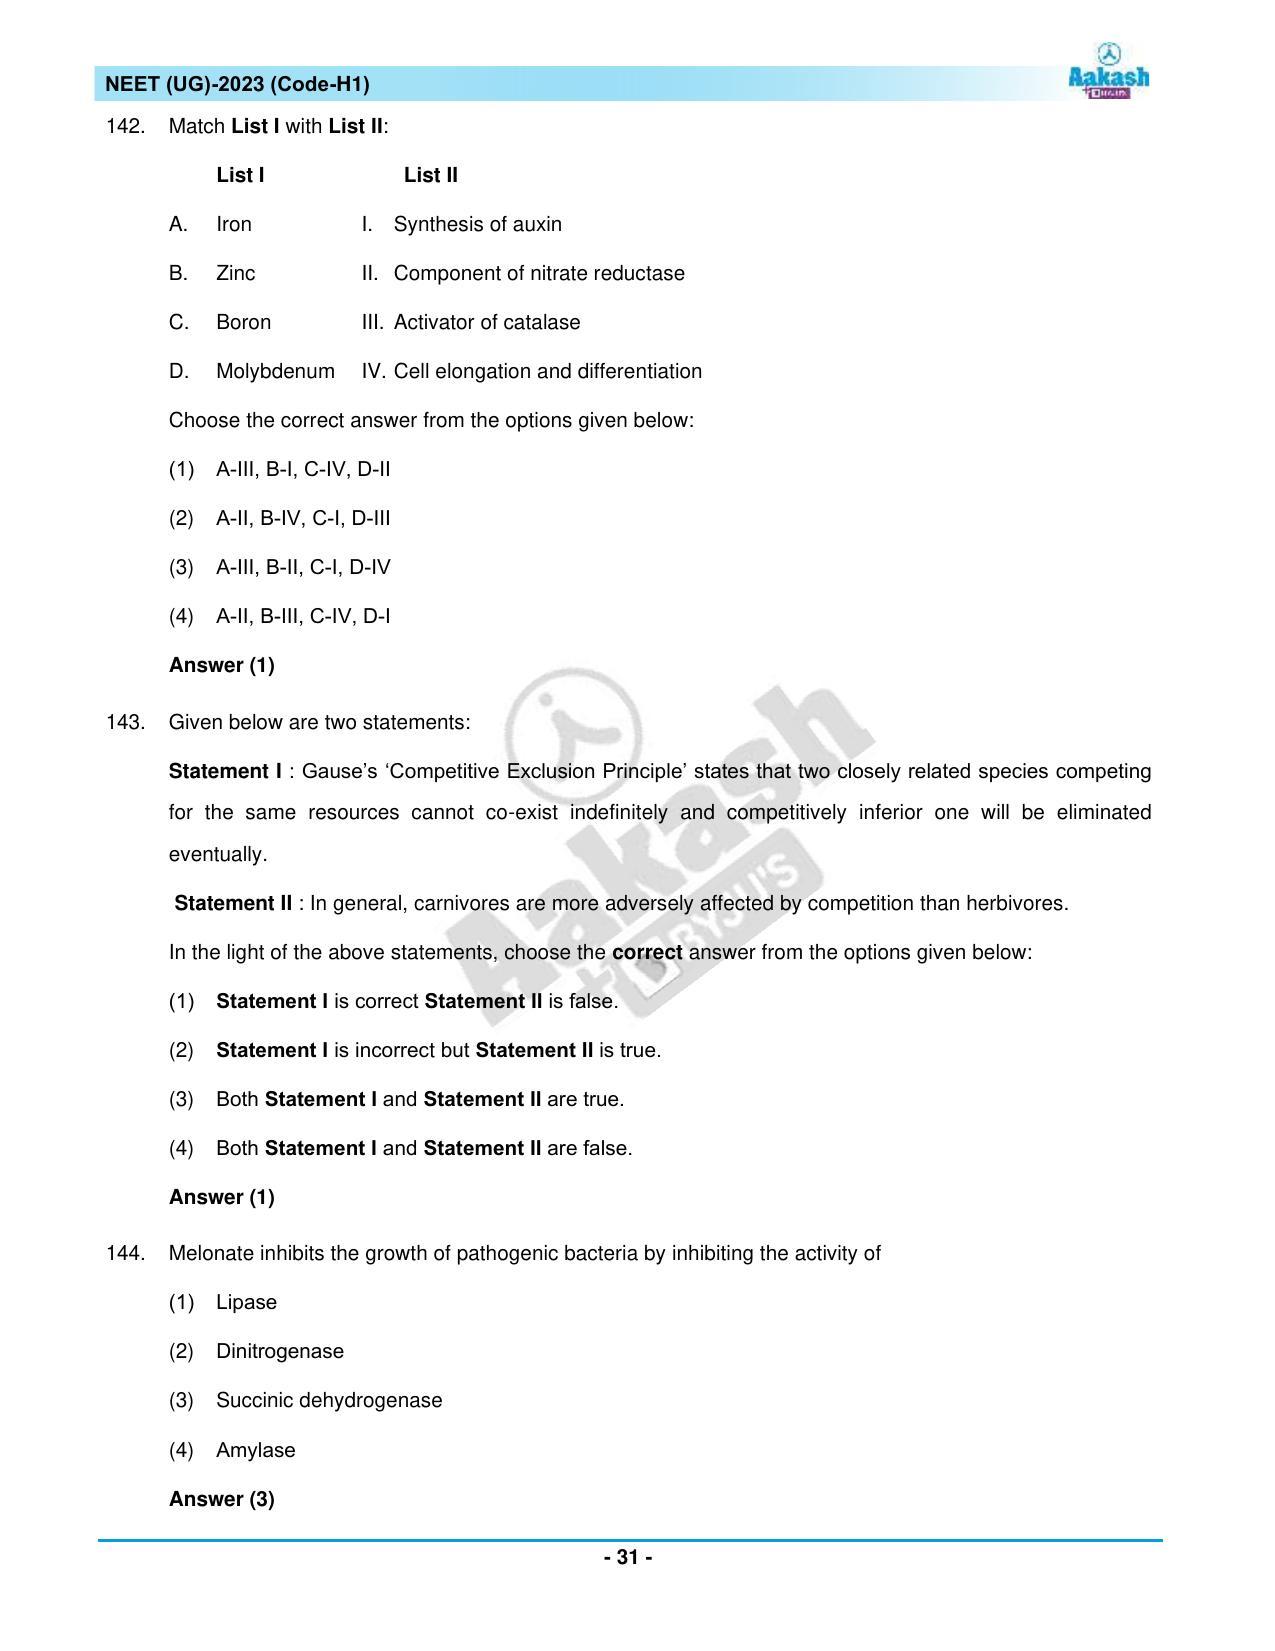 NEET 2023 Question Paper H1 - Page 31